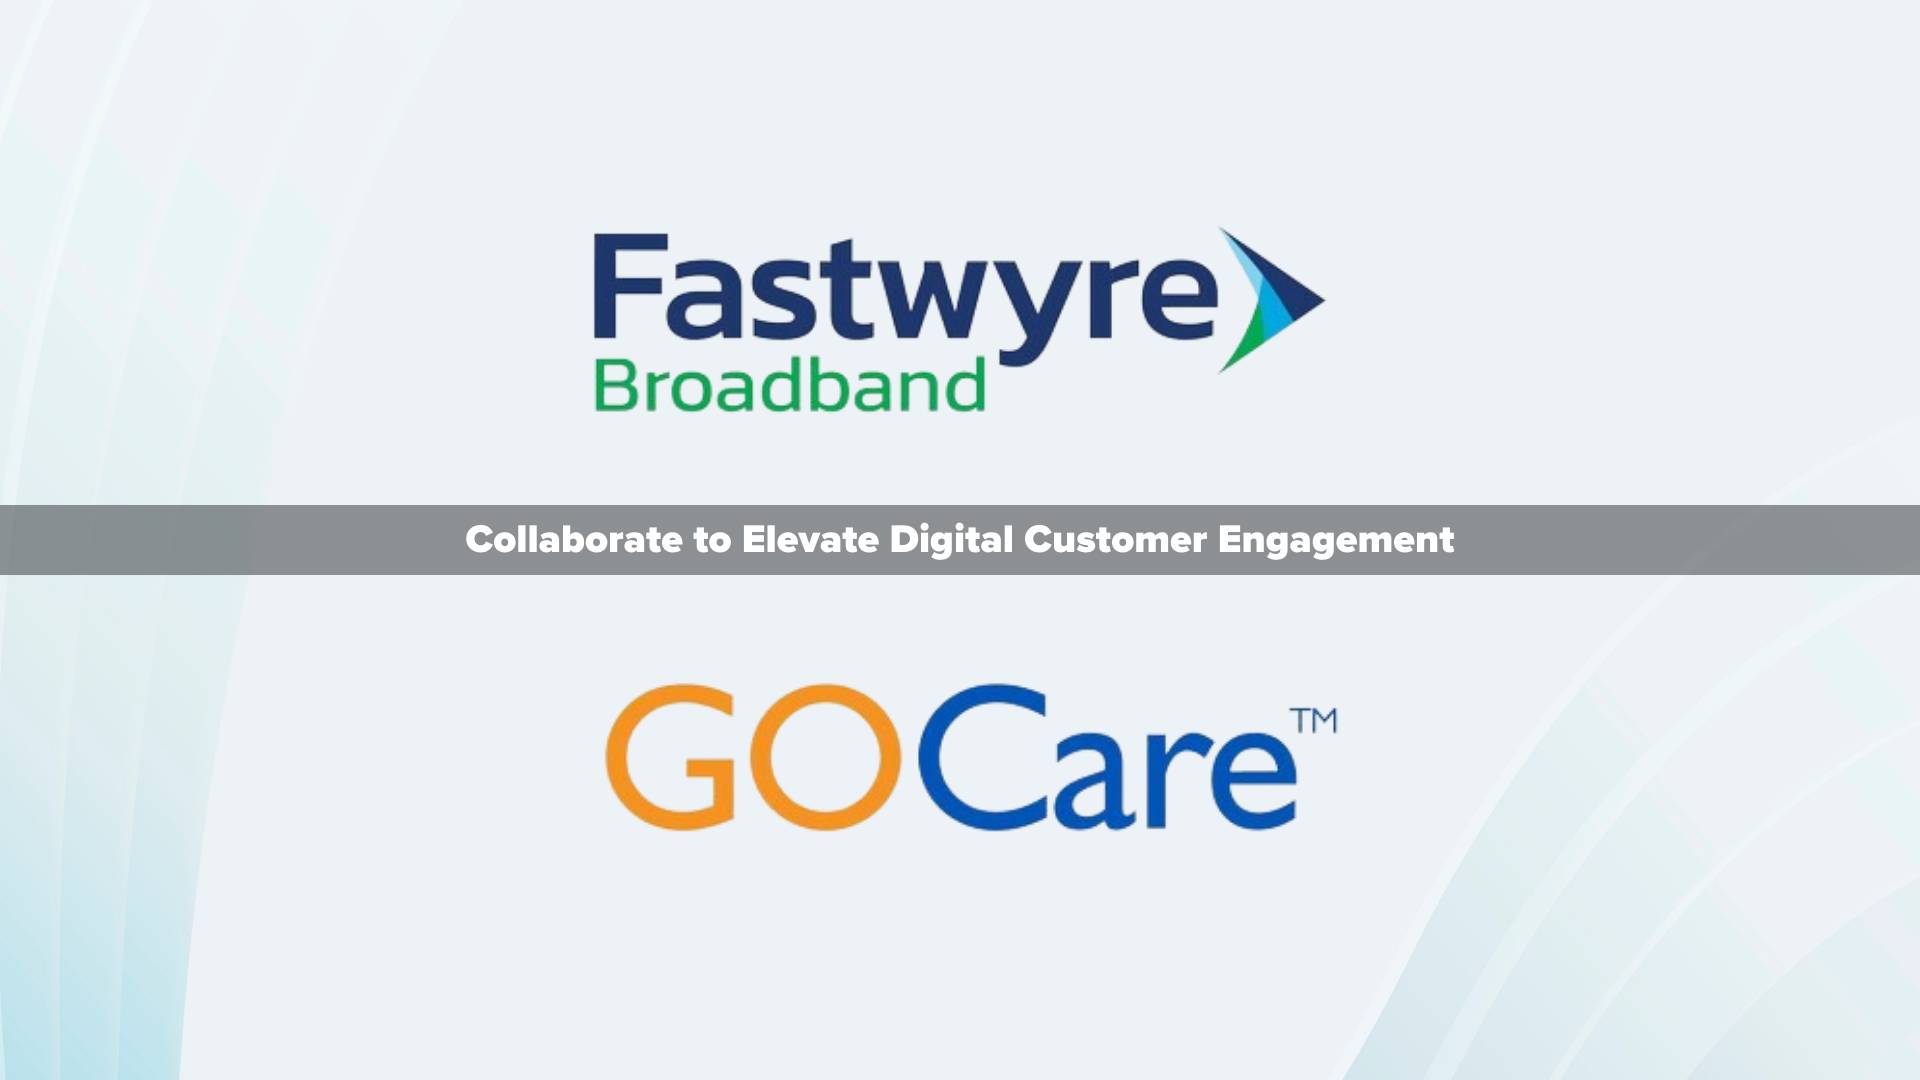 Fastwyre Broadband and GOCare Collaborate to Elevate Digital Customer Engagement